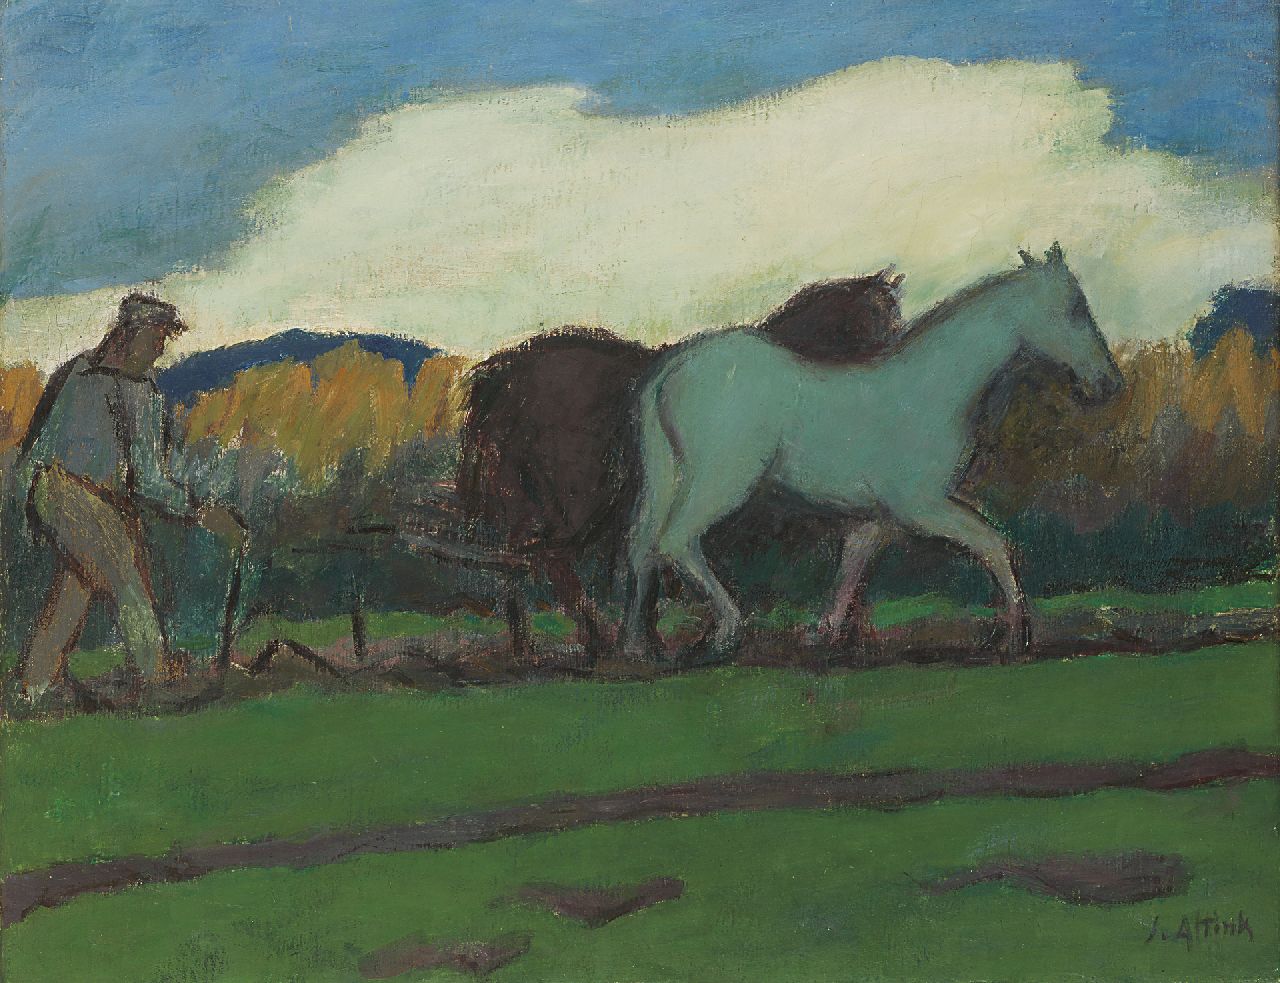 Altink J.  | Jan Altink, Ploughing the fields, wax paint on canvas 55.0 x 70.1 cm, signed l.r. and painted ca. 1924-1928